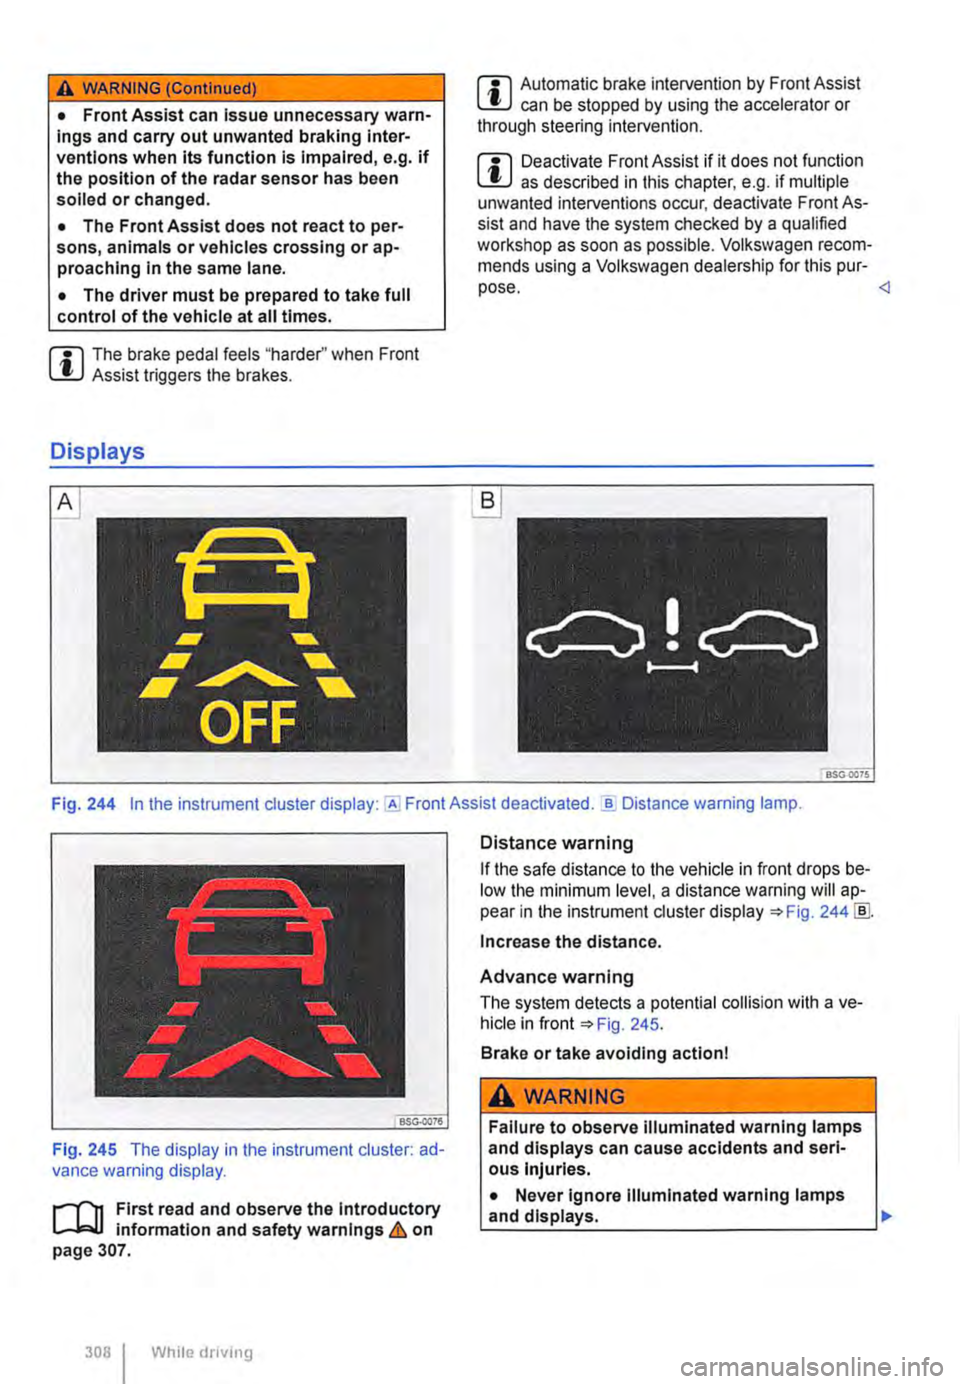 VOLKSWAGEN TRANSPORTER 2013  Owners Manual A WARNING (Continued) 
• Front Assist can Issue unnecessary warn-ings and carry out unwanted braking inter-ventions when Its function is Impaired, e.g. if the position of the radar sensor has been s